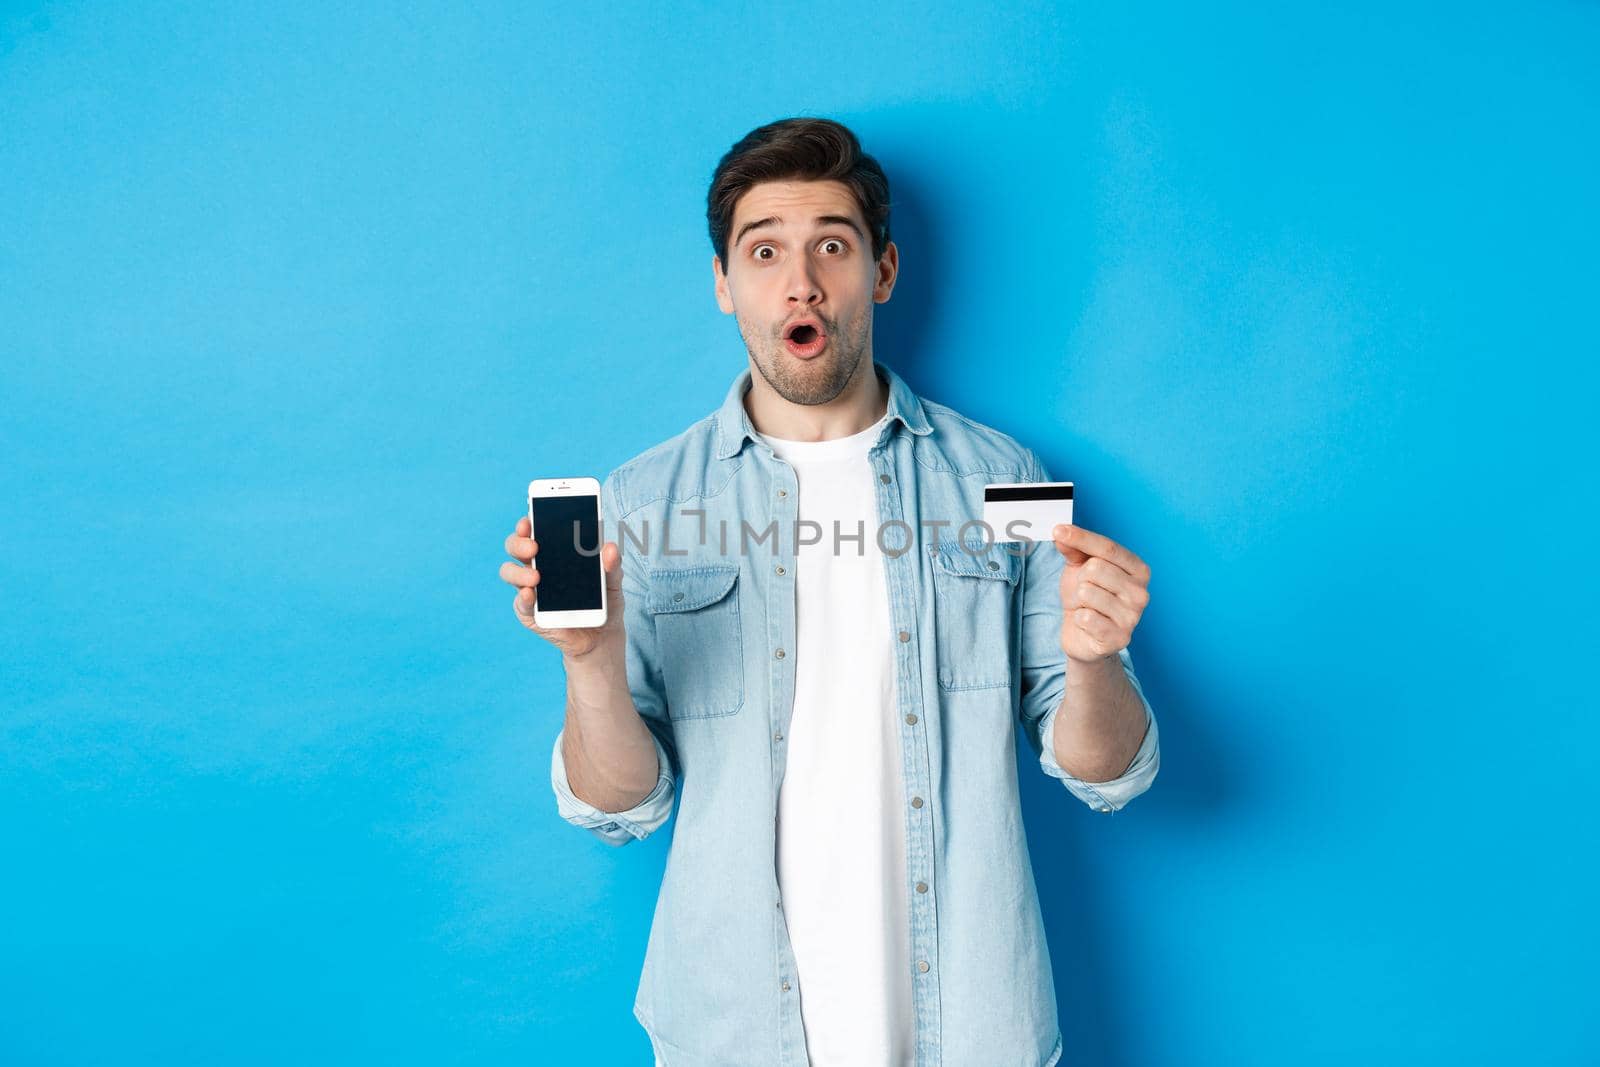 Amazed young man showing mobile cell phone screen and credit card, shop online, standing against blue background.